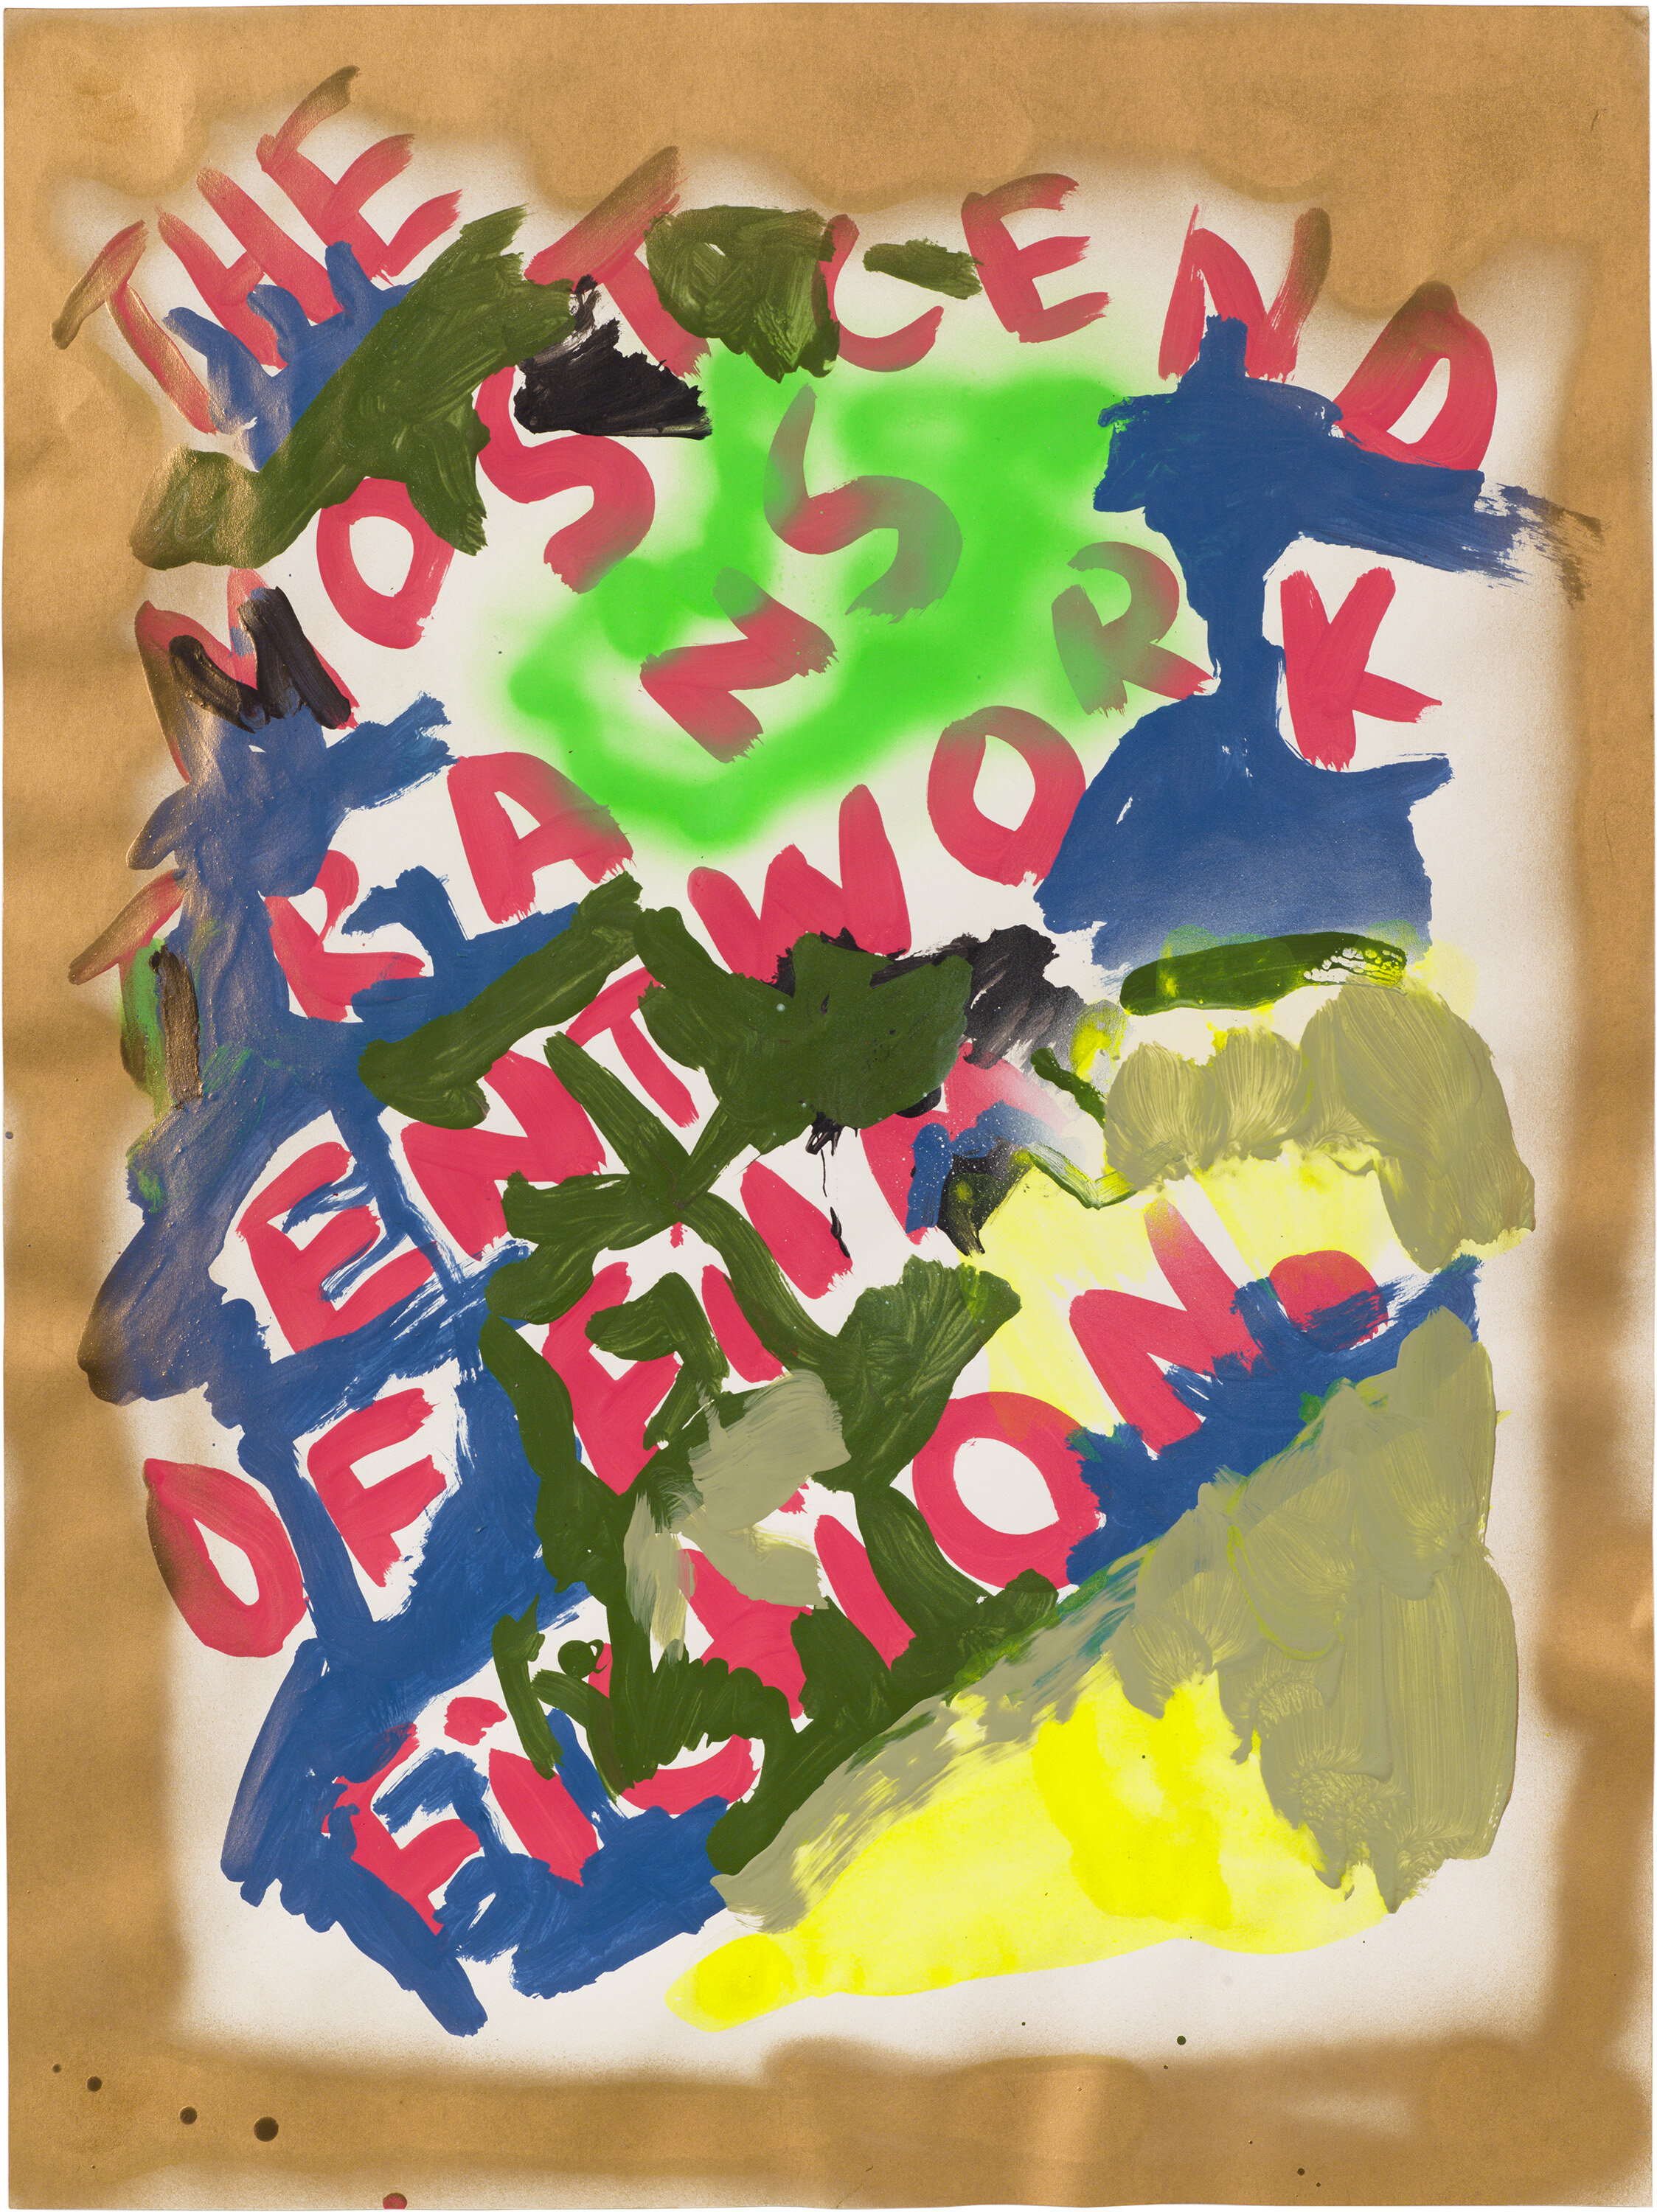  Drew Beattie and Ben Shepard   DBBS-DRW-2015-258   2015  acrylic and spray paint on paper  24 x 18 inches 